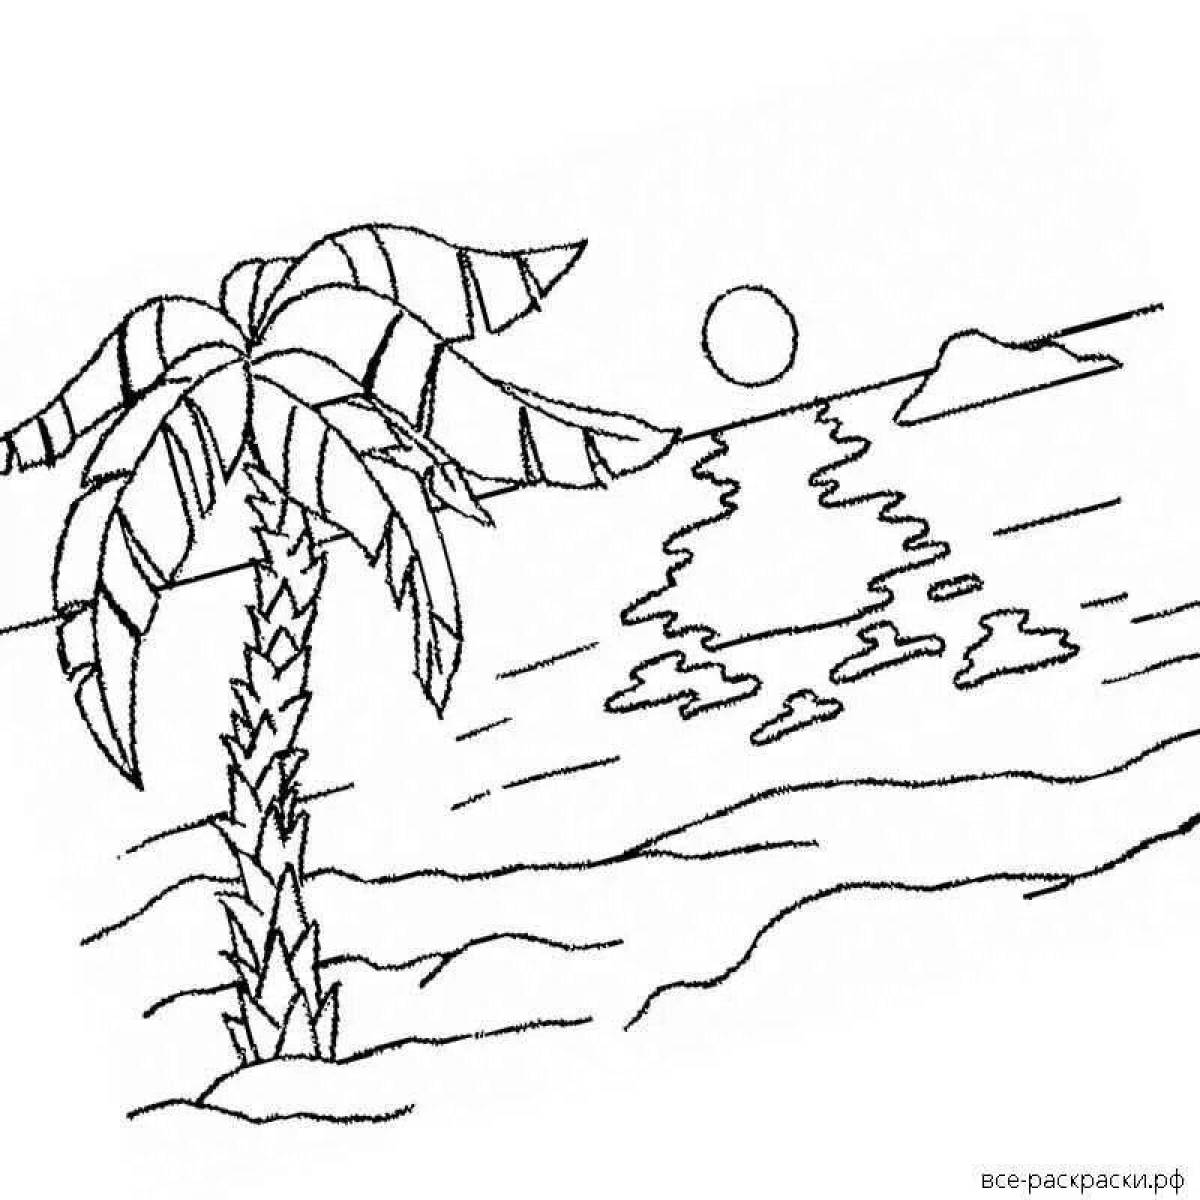 Amazing seascape coloring page